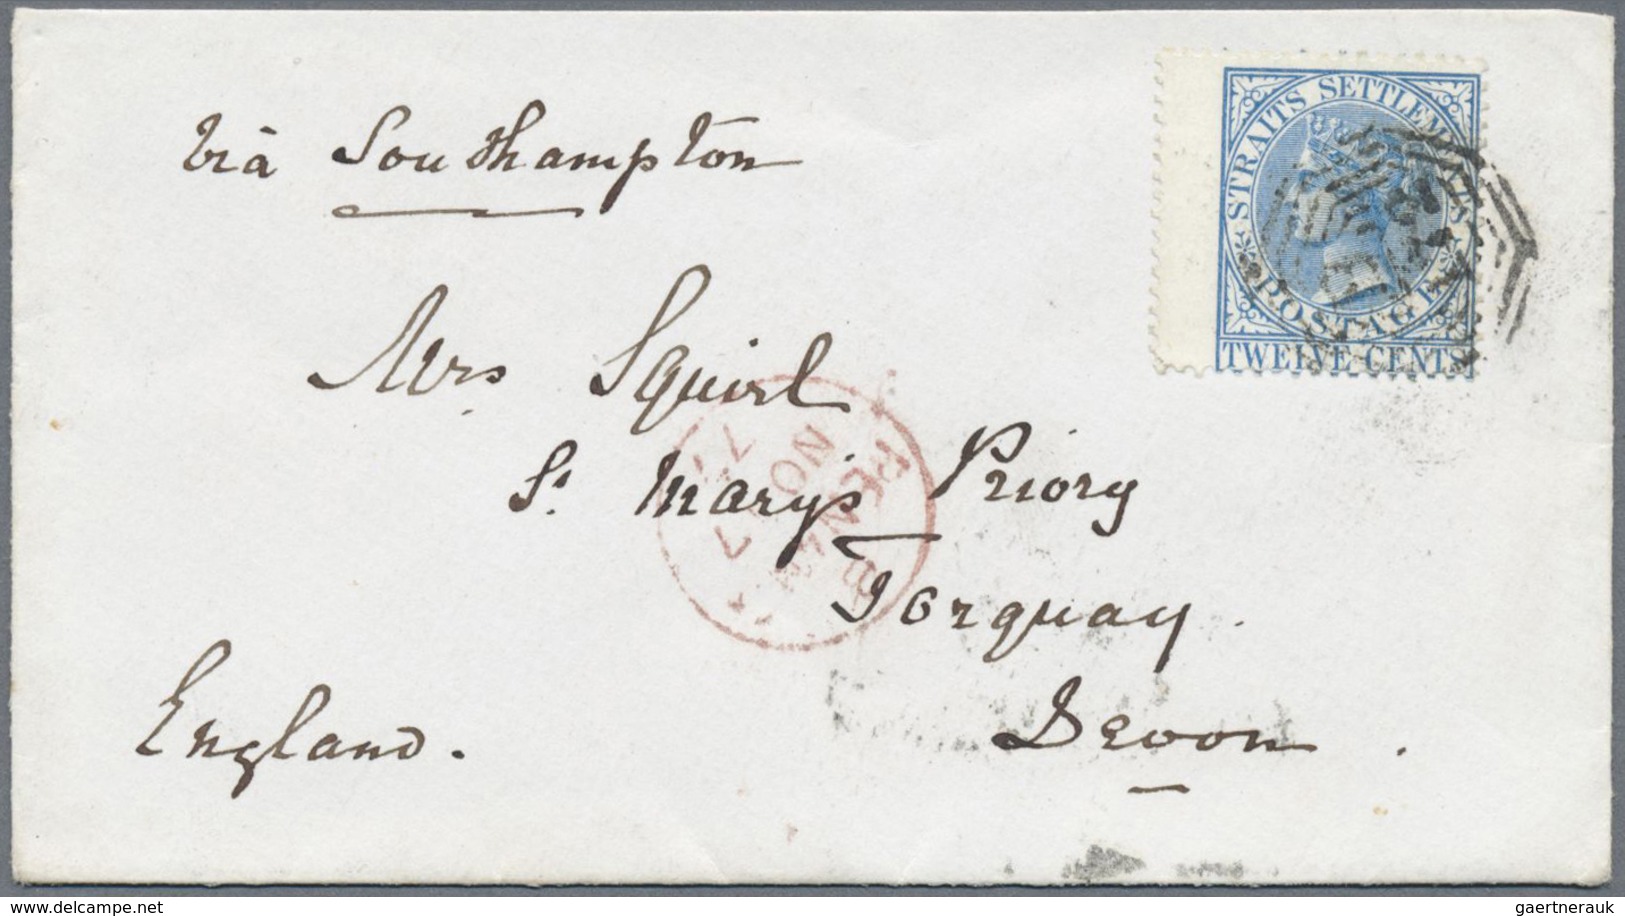 Br Malaiische Staaten - Penang: 1877 Cover To Torquay, England Via Southampton Franked By Straits Settl - Penang